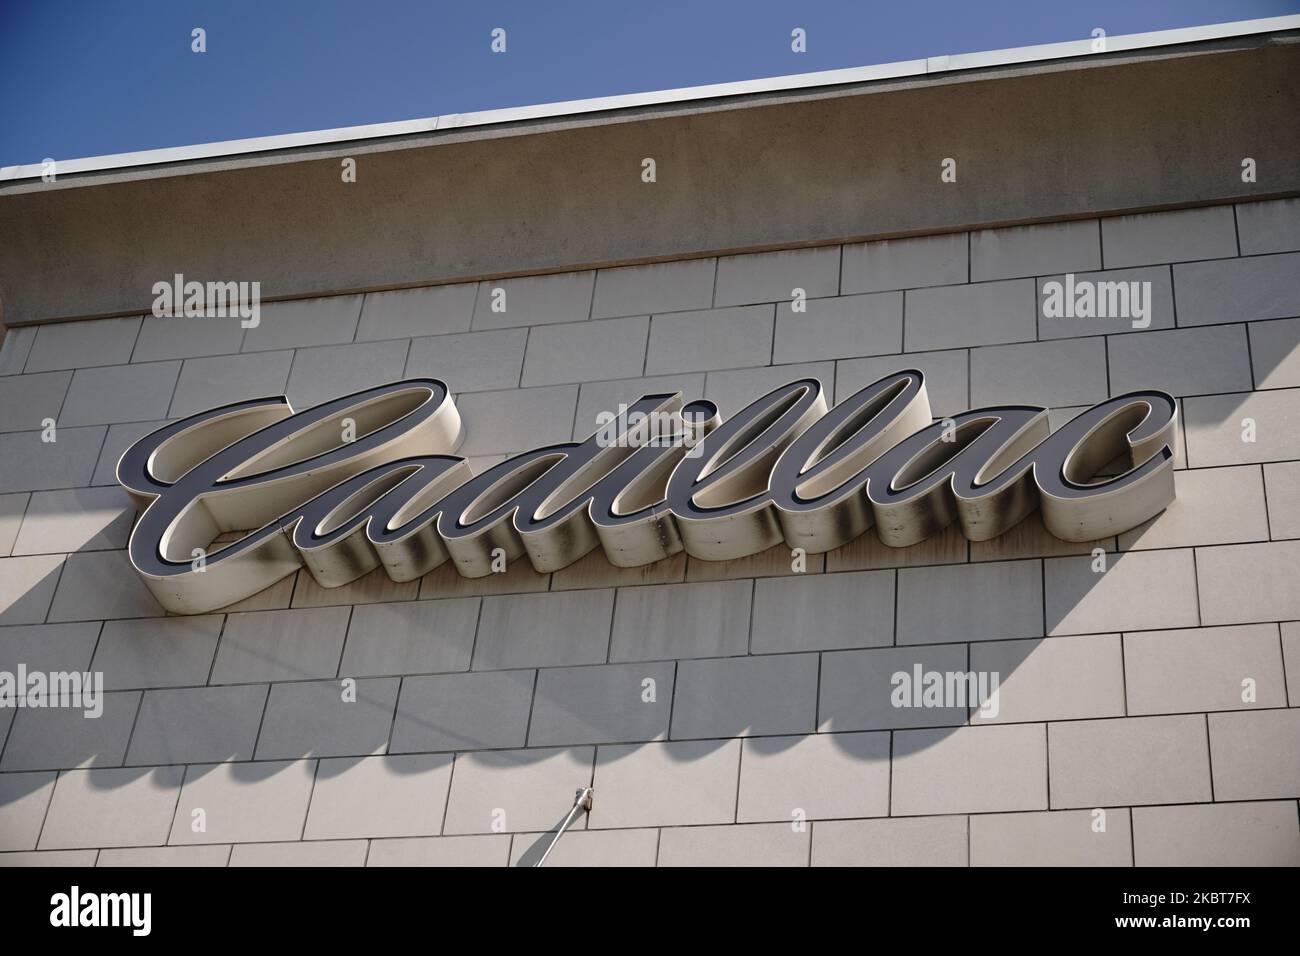 A view of Cadillac dealership in Queens, New York, USA., on July 4, 2020. (Photo by John Nacion/NurPhoto) Stock Photo